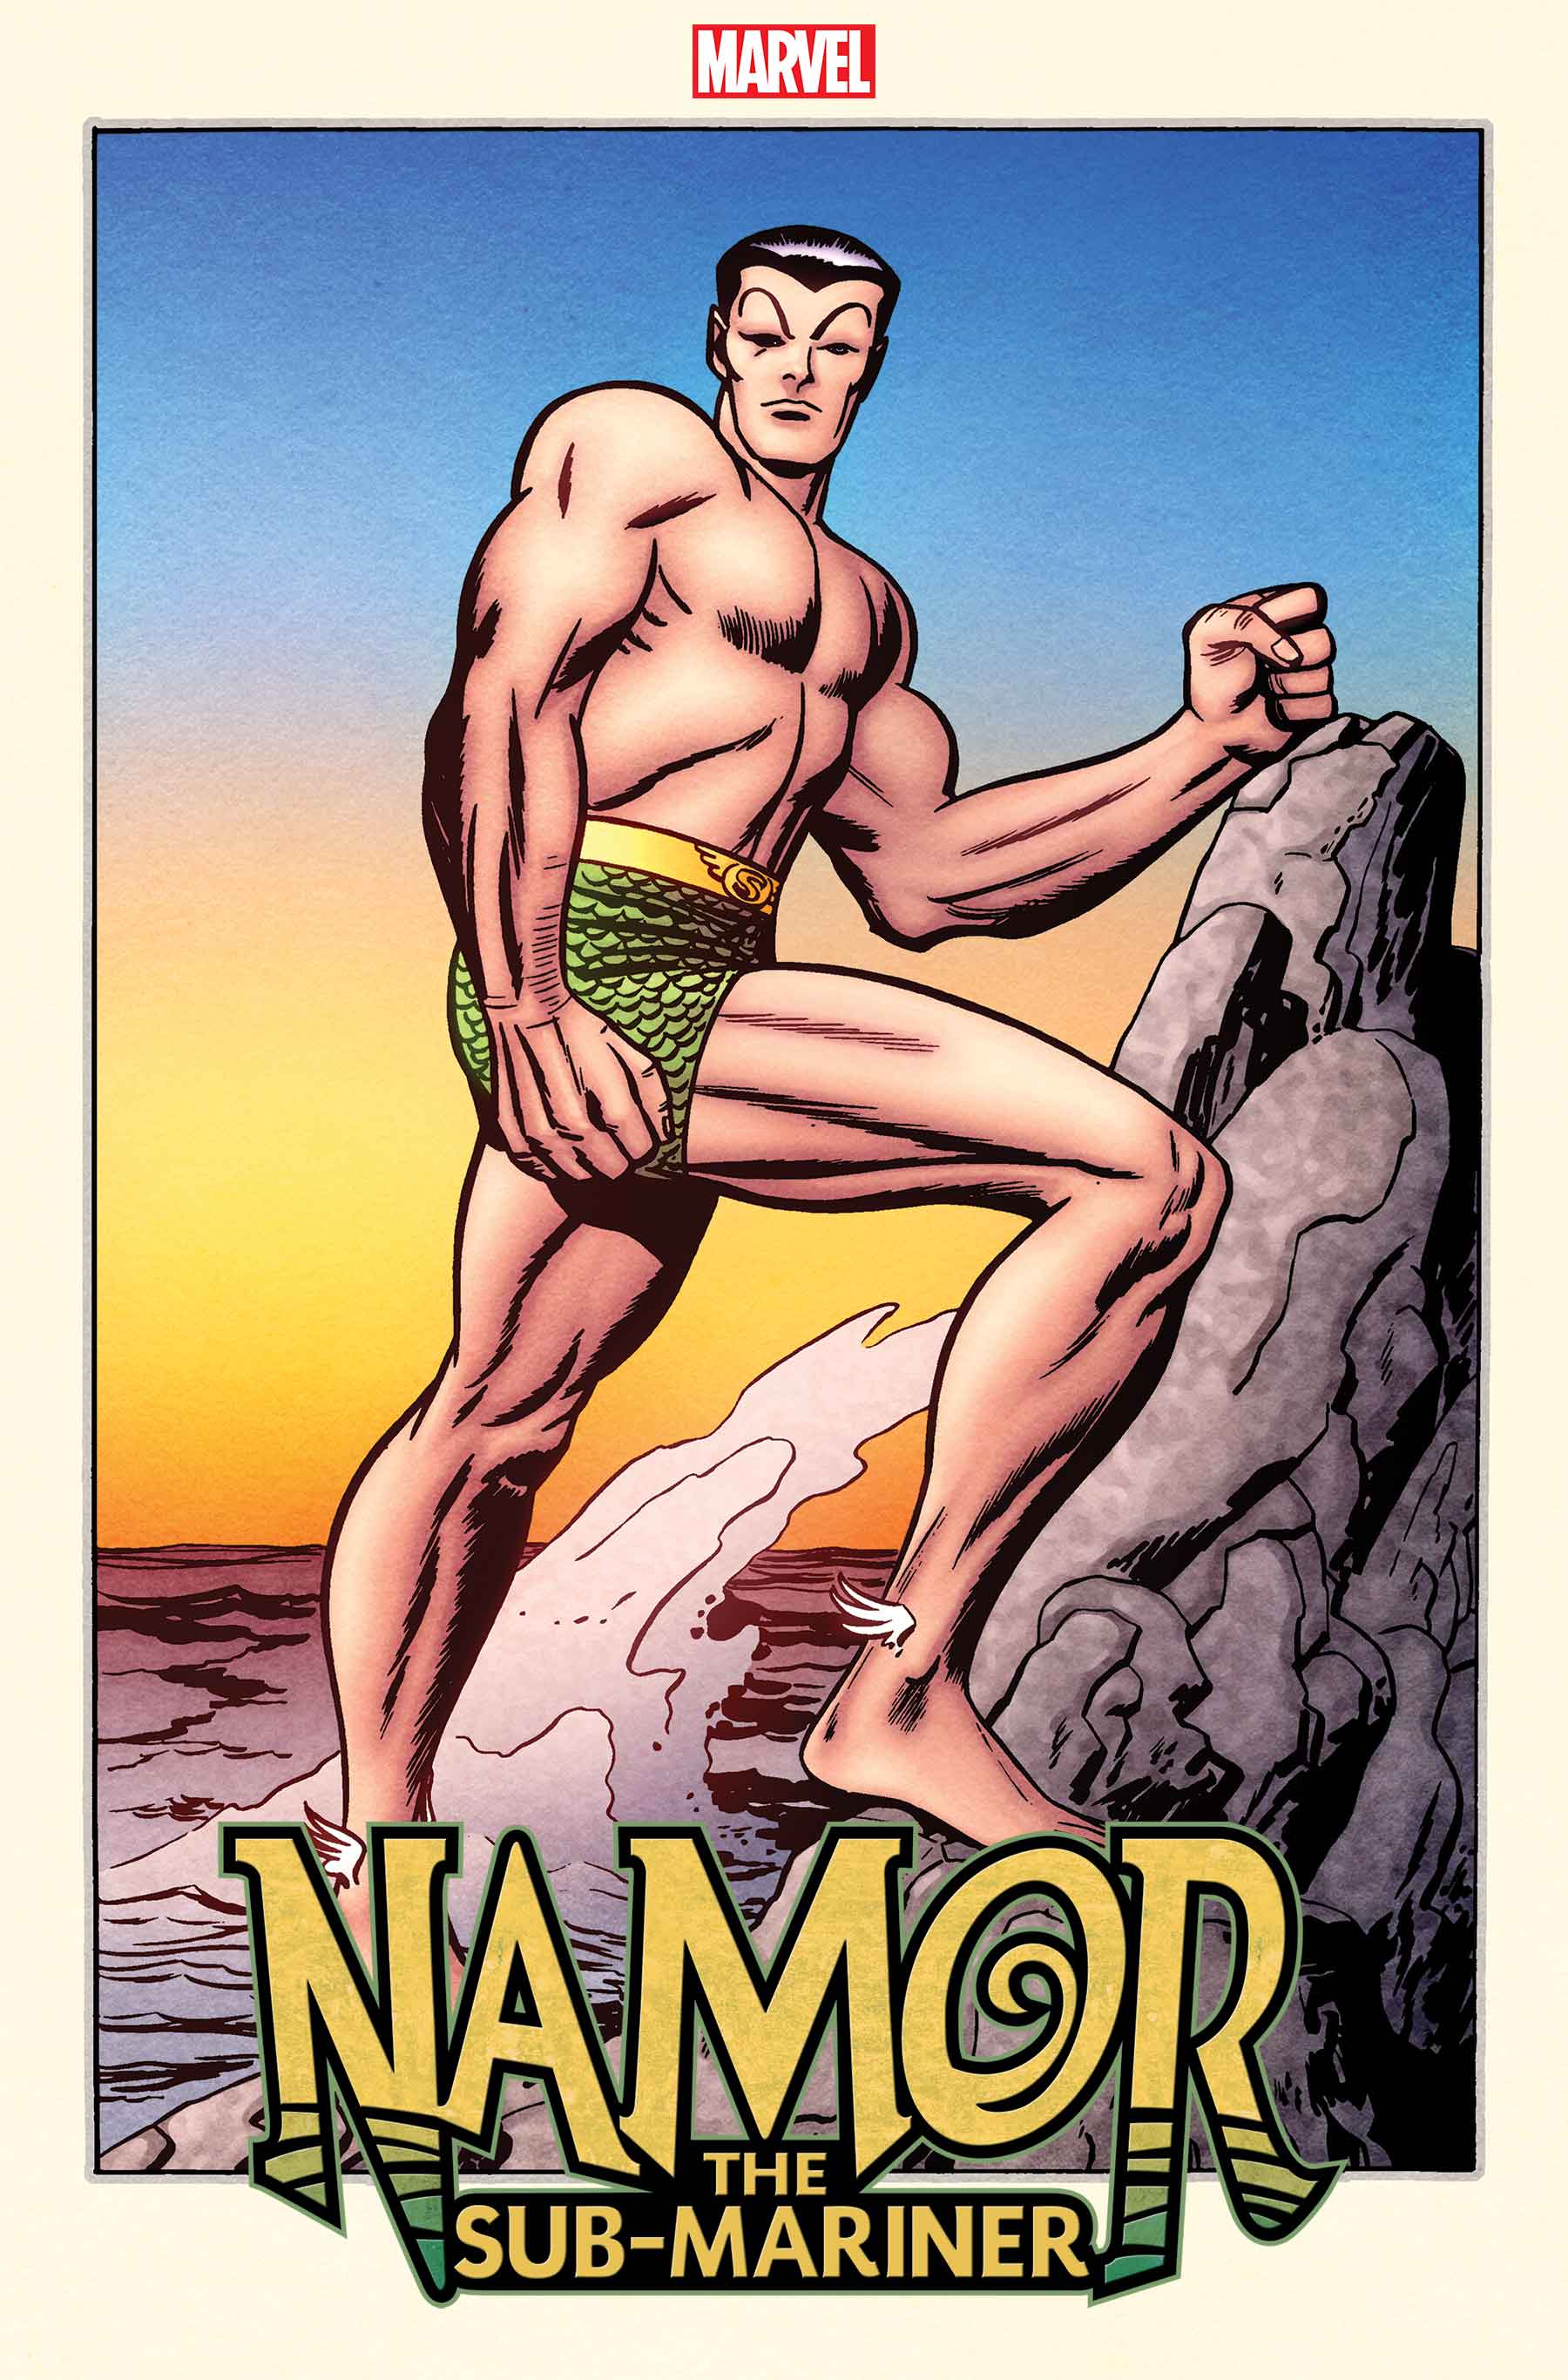 Namor: Conquered Shores (2022) #1 (Variant)